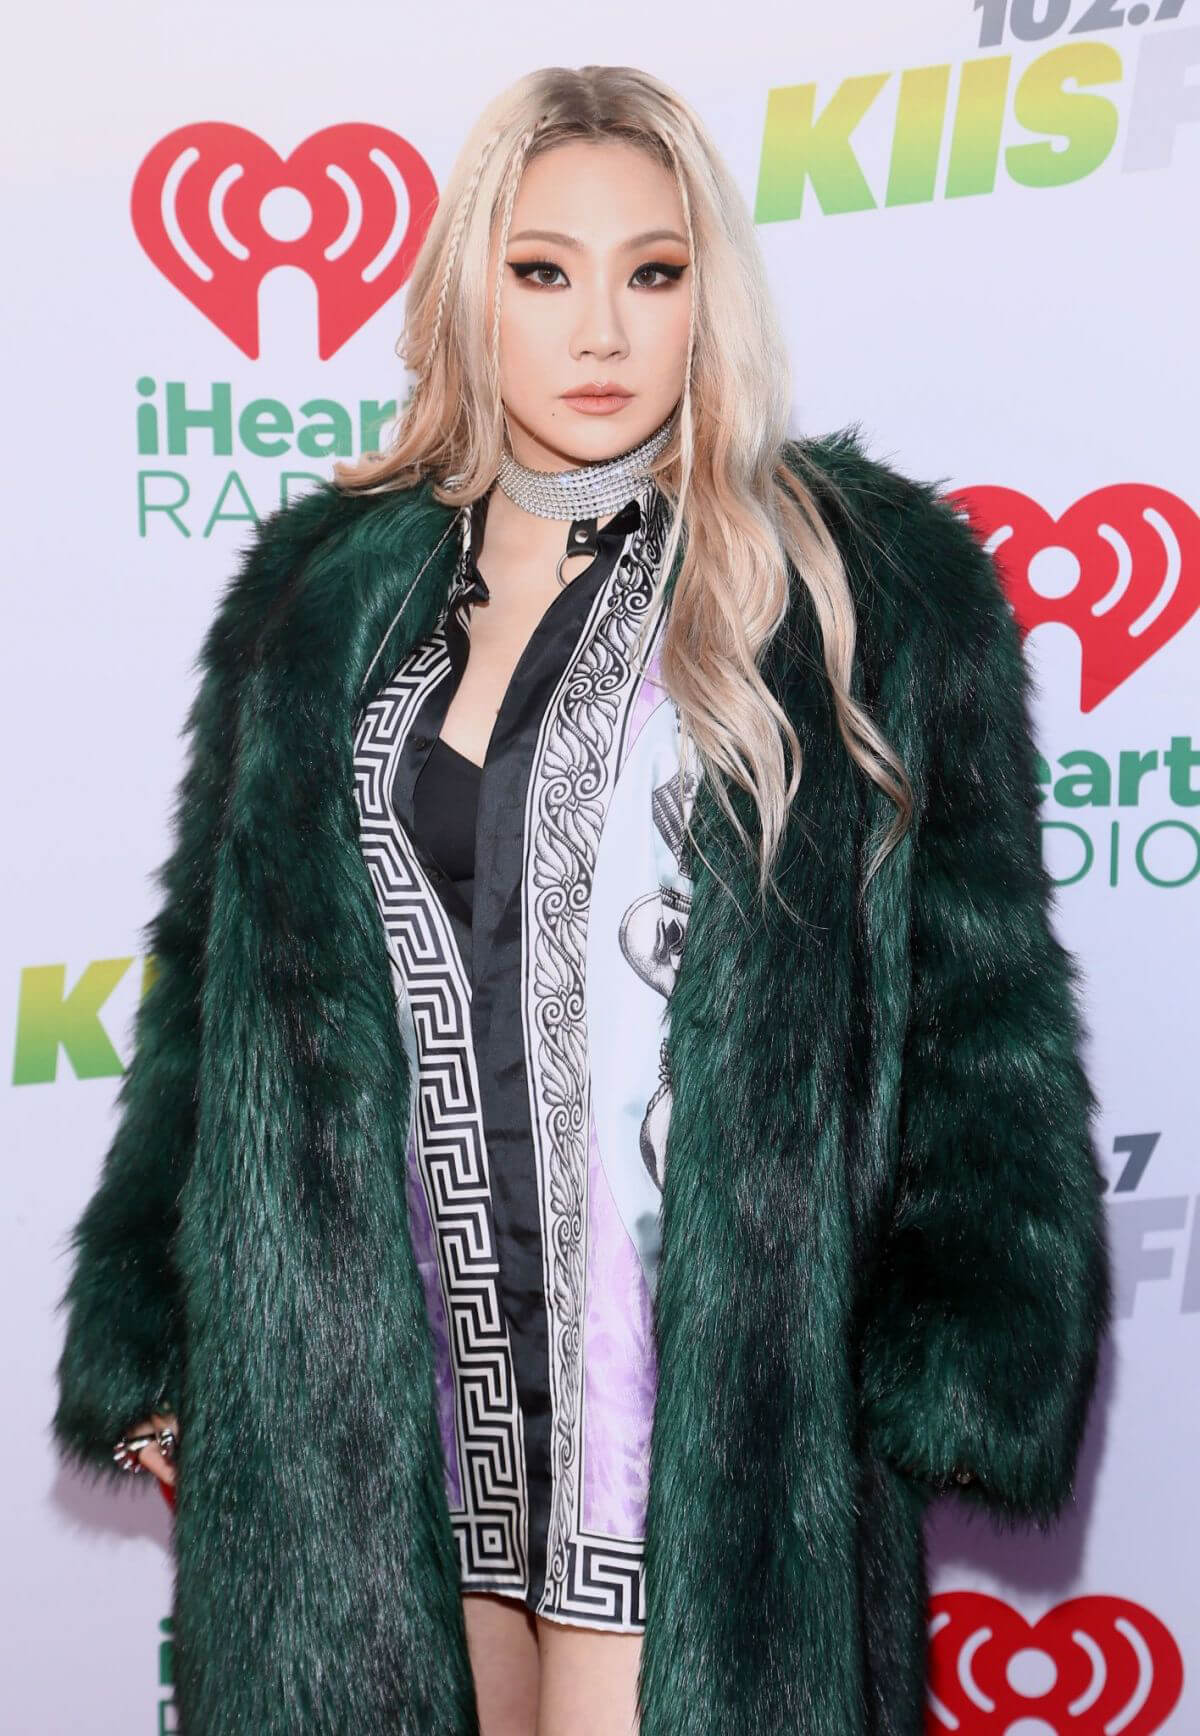 CL Performs at 102.7 Kiis FM's Jingle Ball Pre-show in Los Angeles